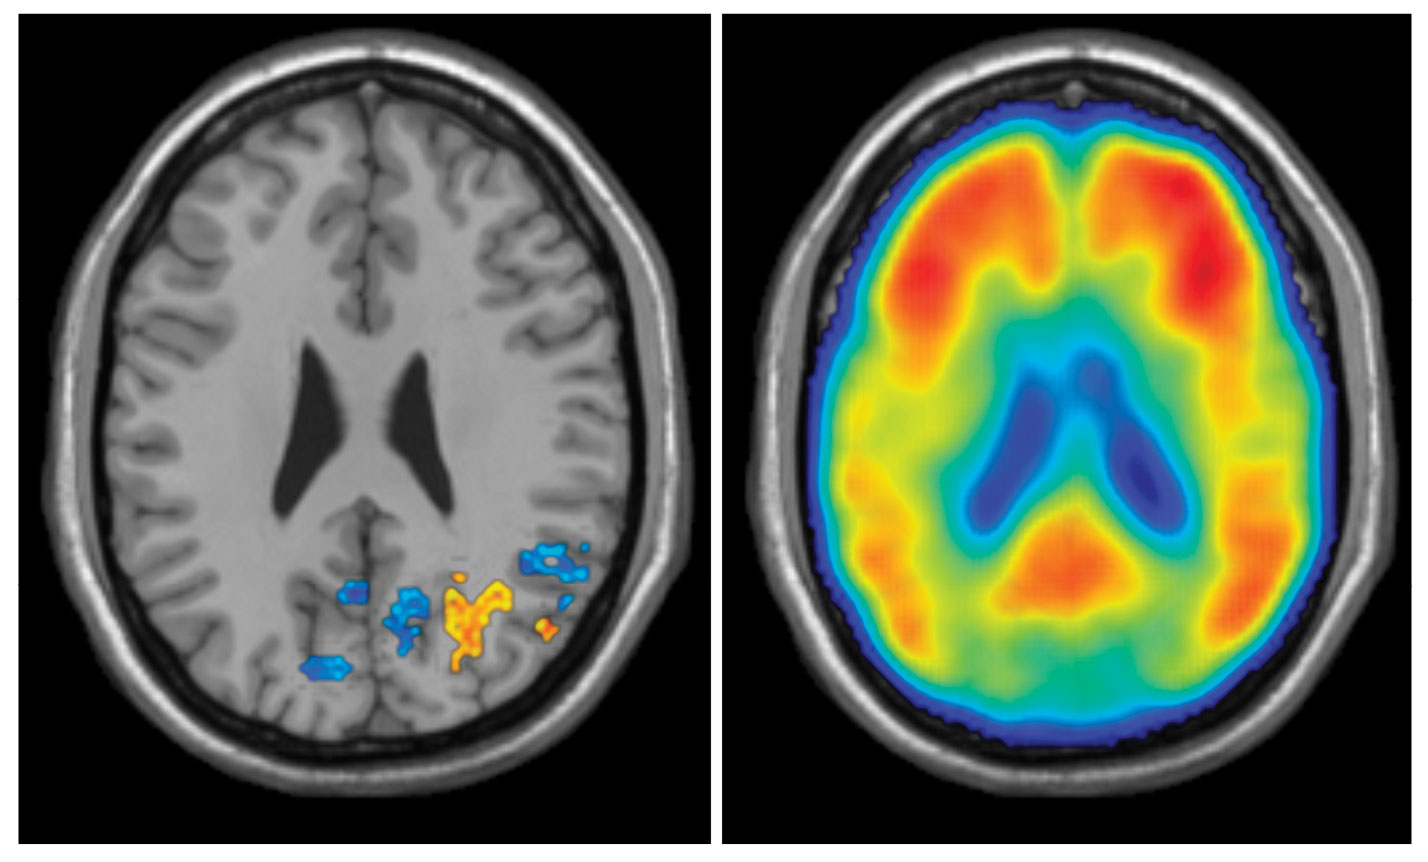 Left: fMRI recordings showed that young people activated orange regions while older people deactivated blue regions during memory formation. Right: PET data showing concentration of amyloid beta (AB) in the brain of older subjects. Regions with high AB (redder colors) correspond to deactivated (blue) regions in the left image. (credit: Jeremy Elman)